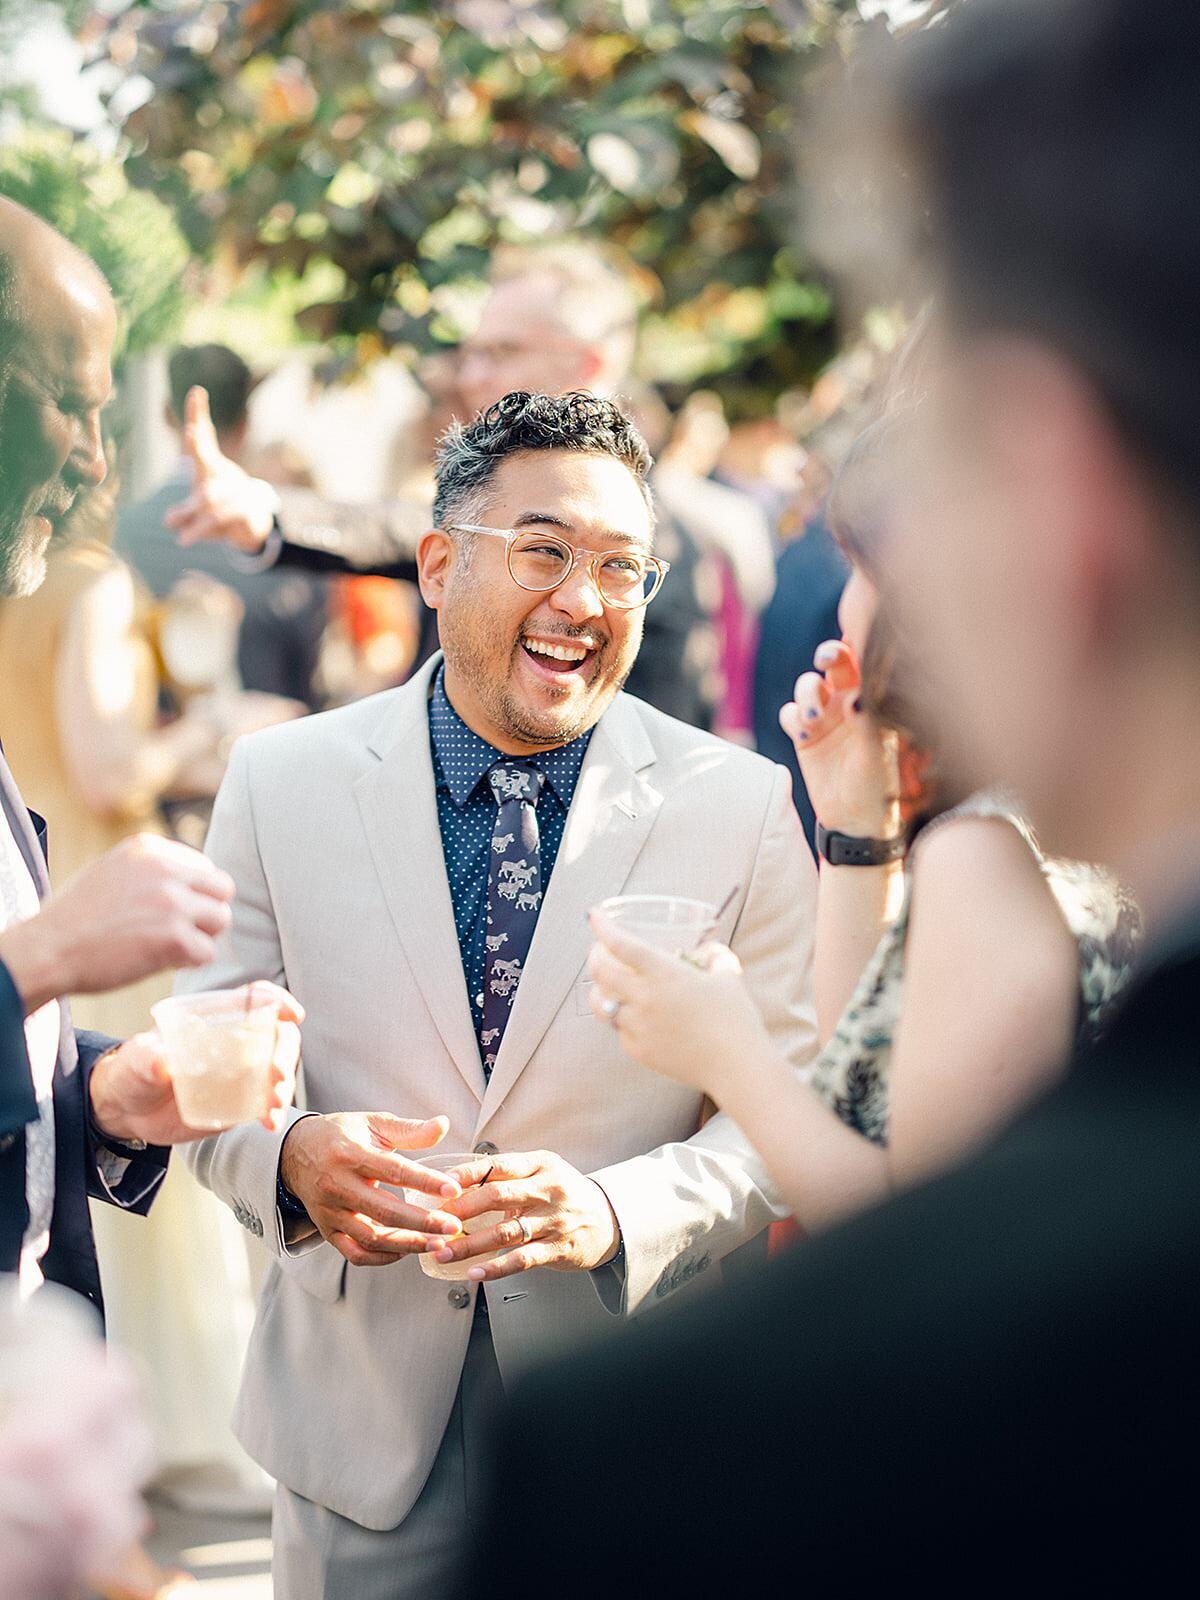 Fashionable wedding guests enjoy signature cocktails in the ivy covered courtyard of Clementine Hall